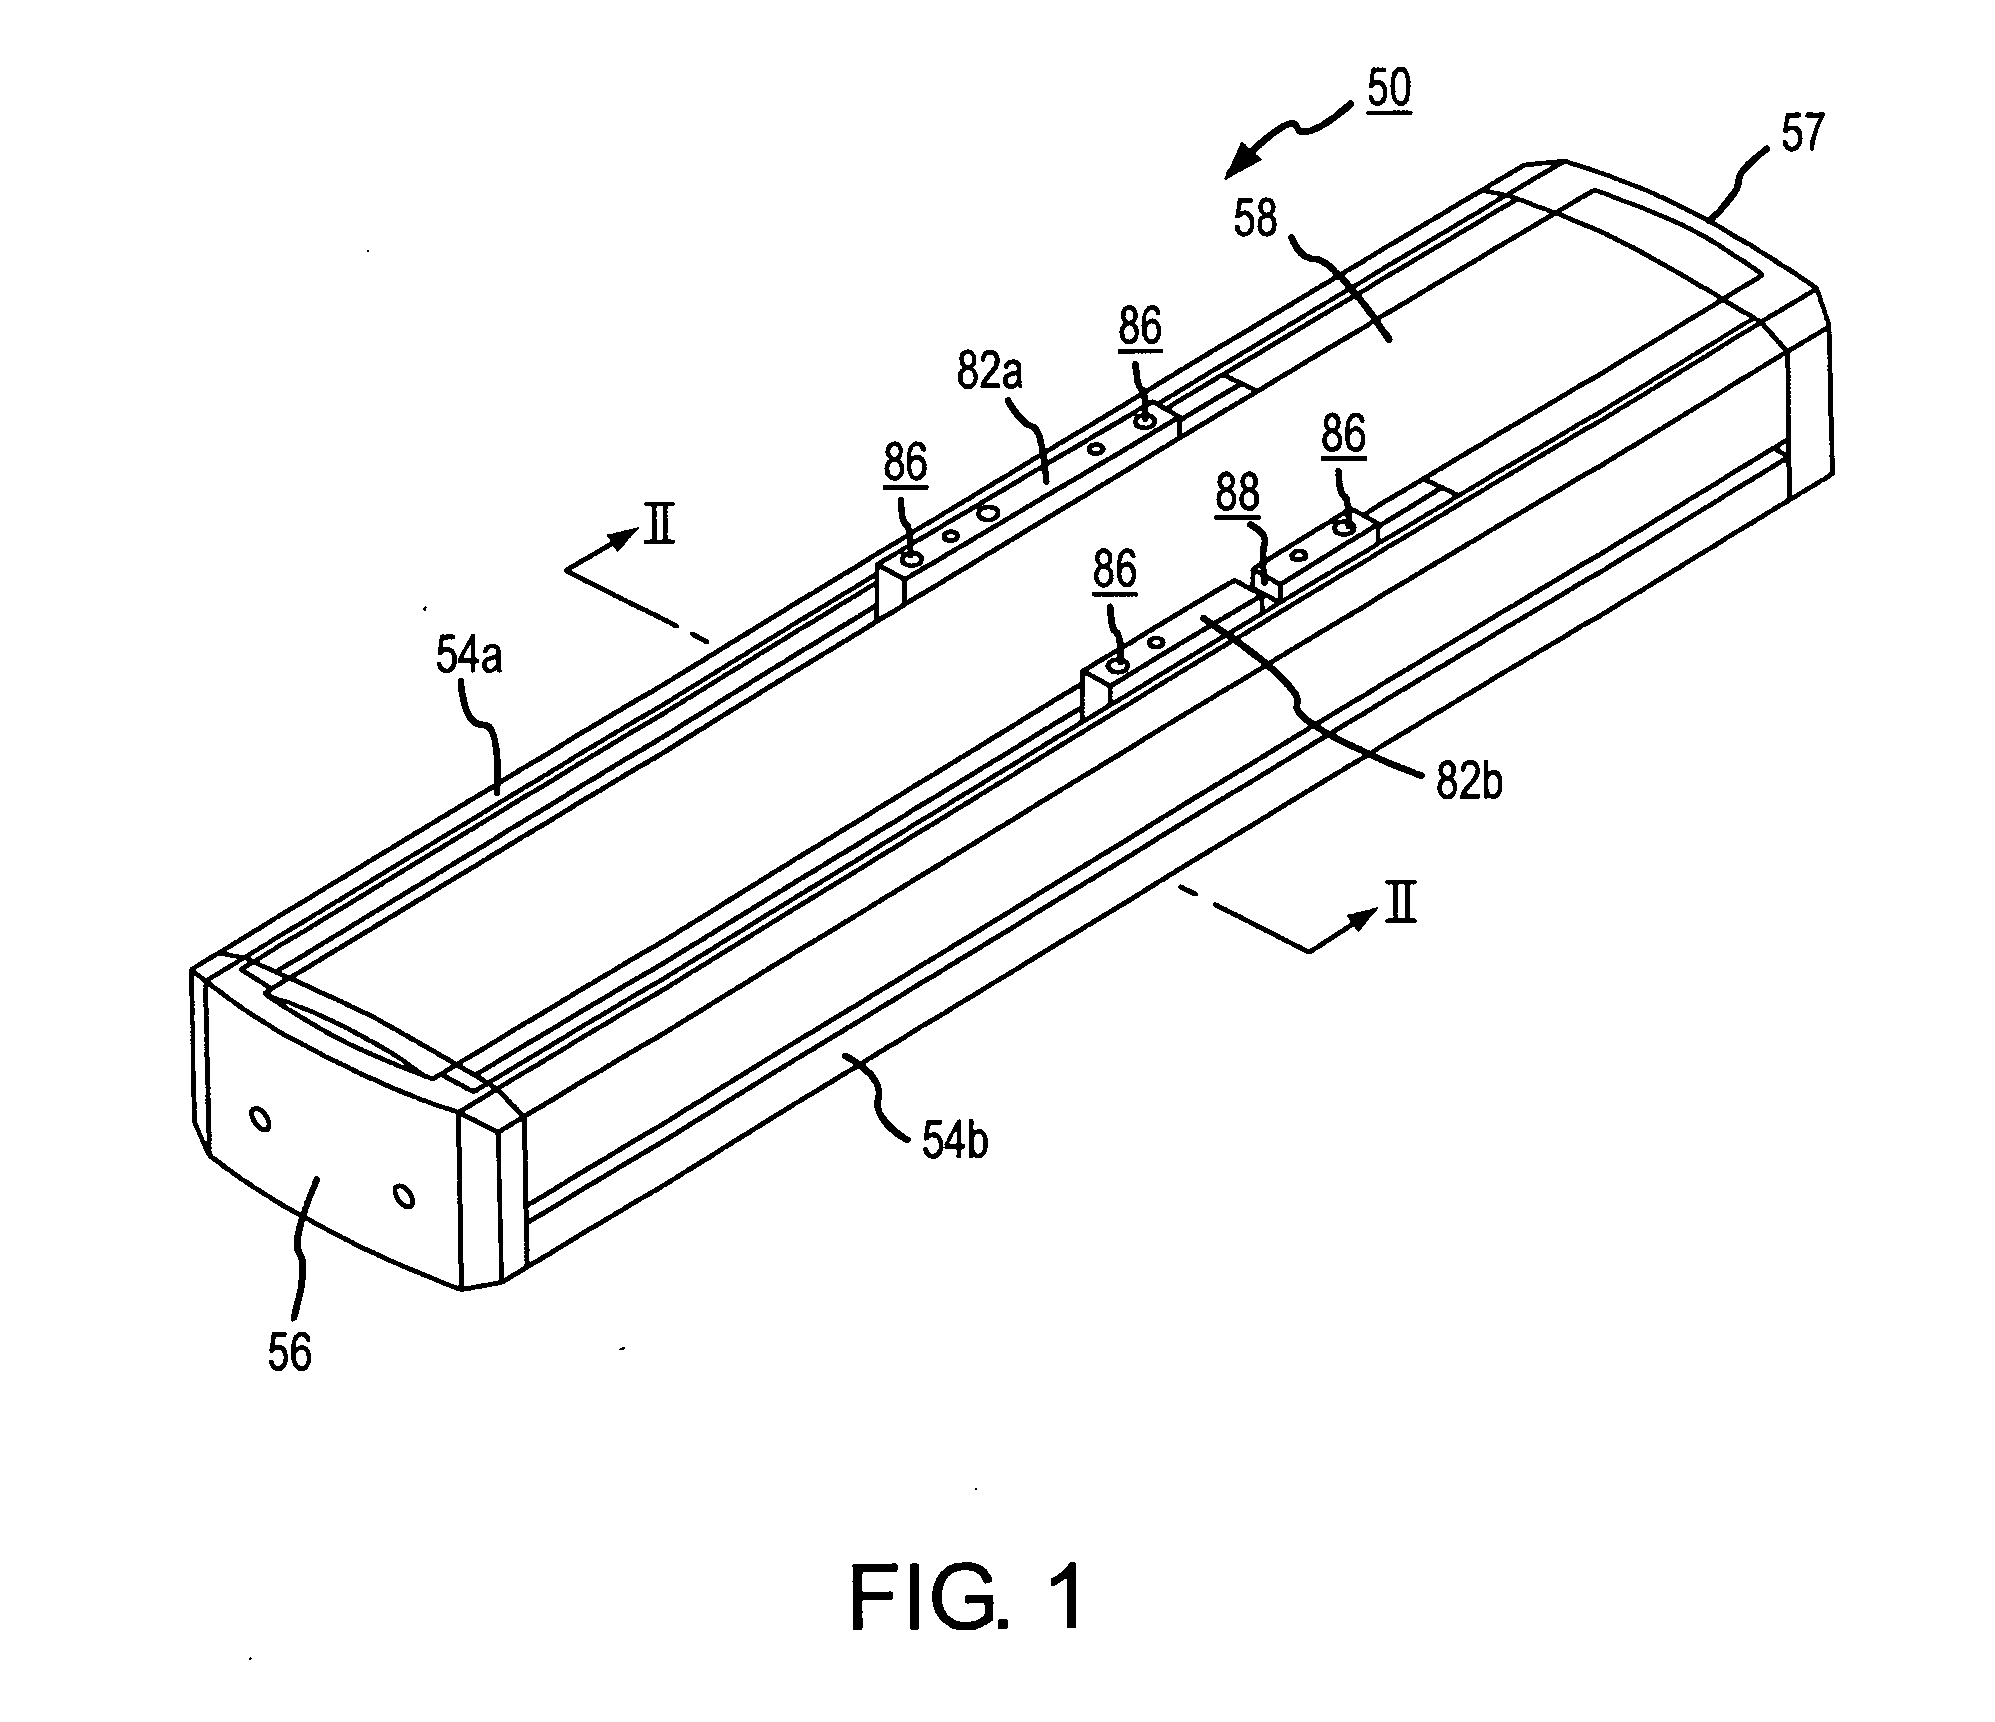 Stepping motor control system and method for controlling a stepping motor using closed and open loop controls